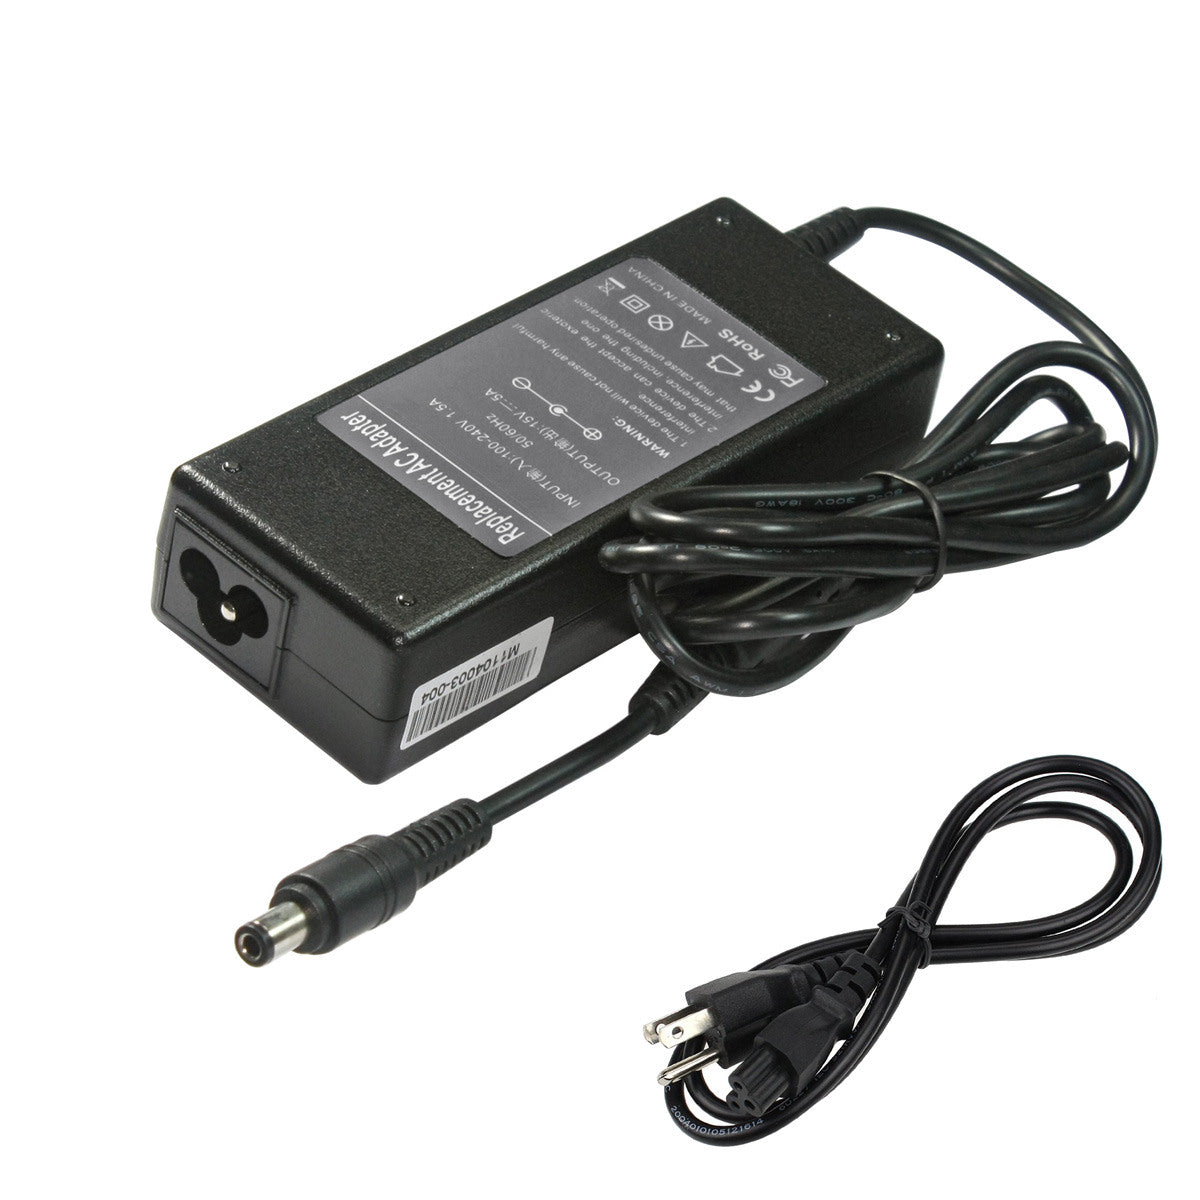 Compatible Replacement Toshiba Satellite M115-S3 Series AC Adapter.